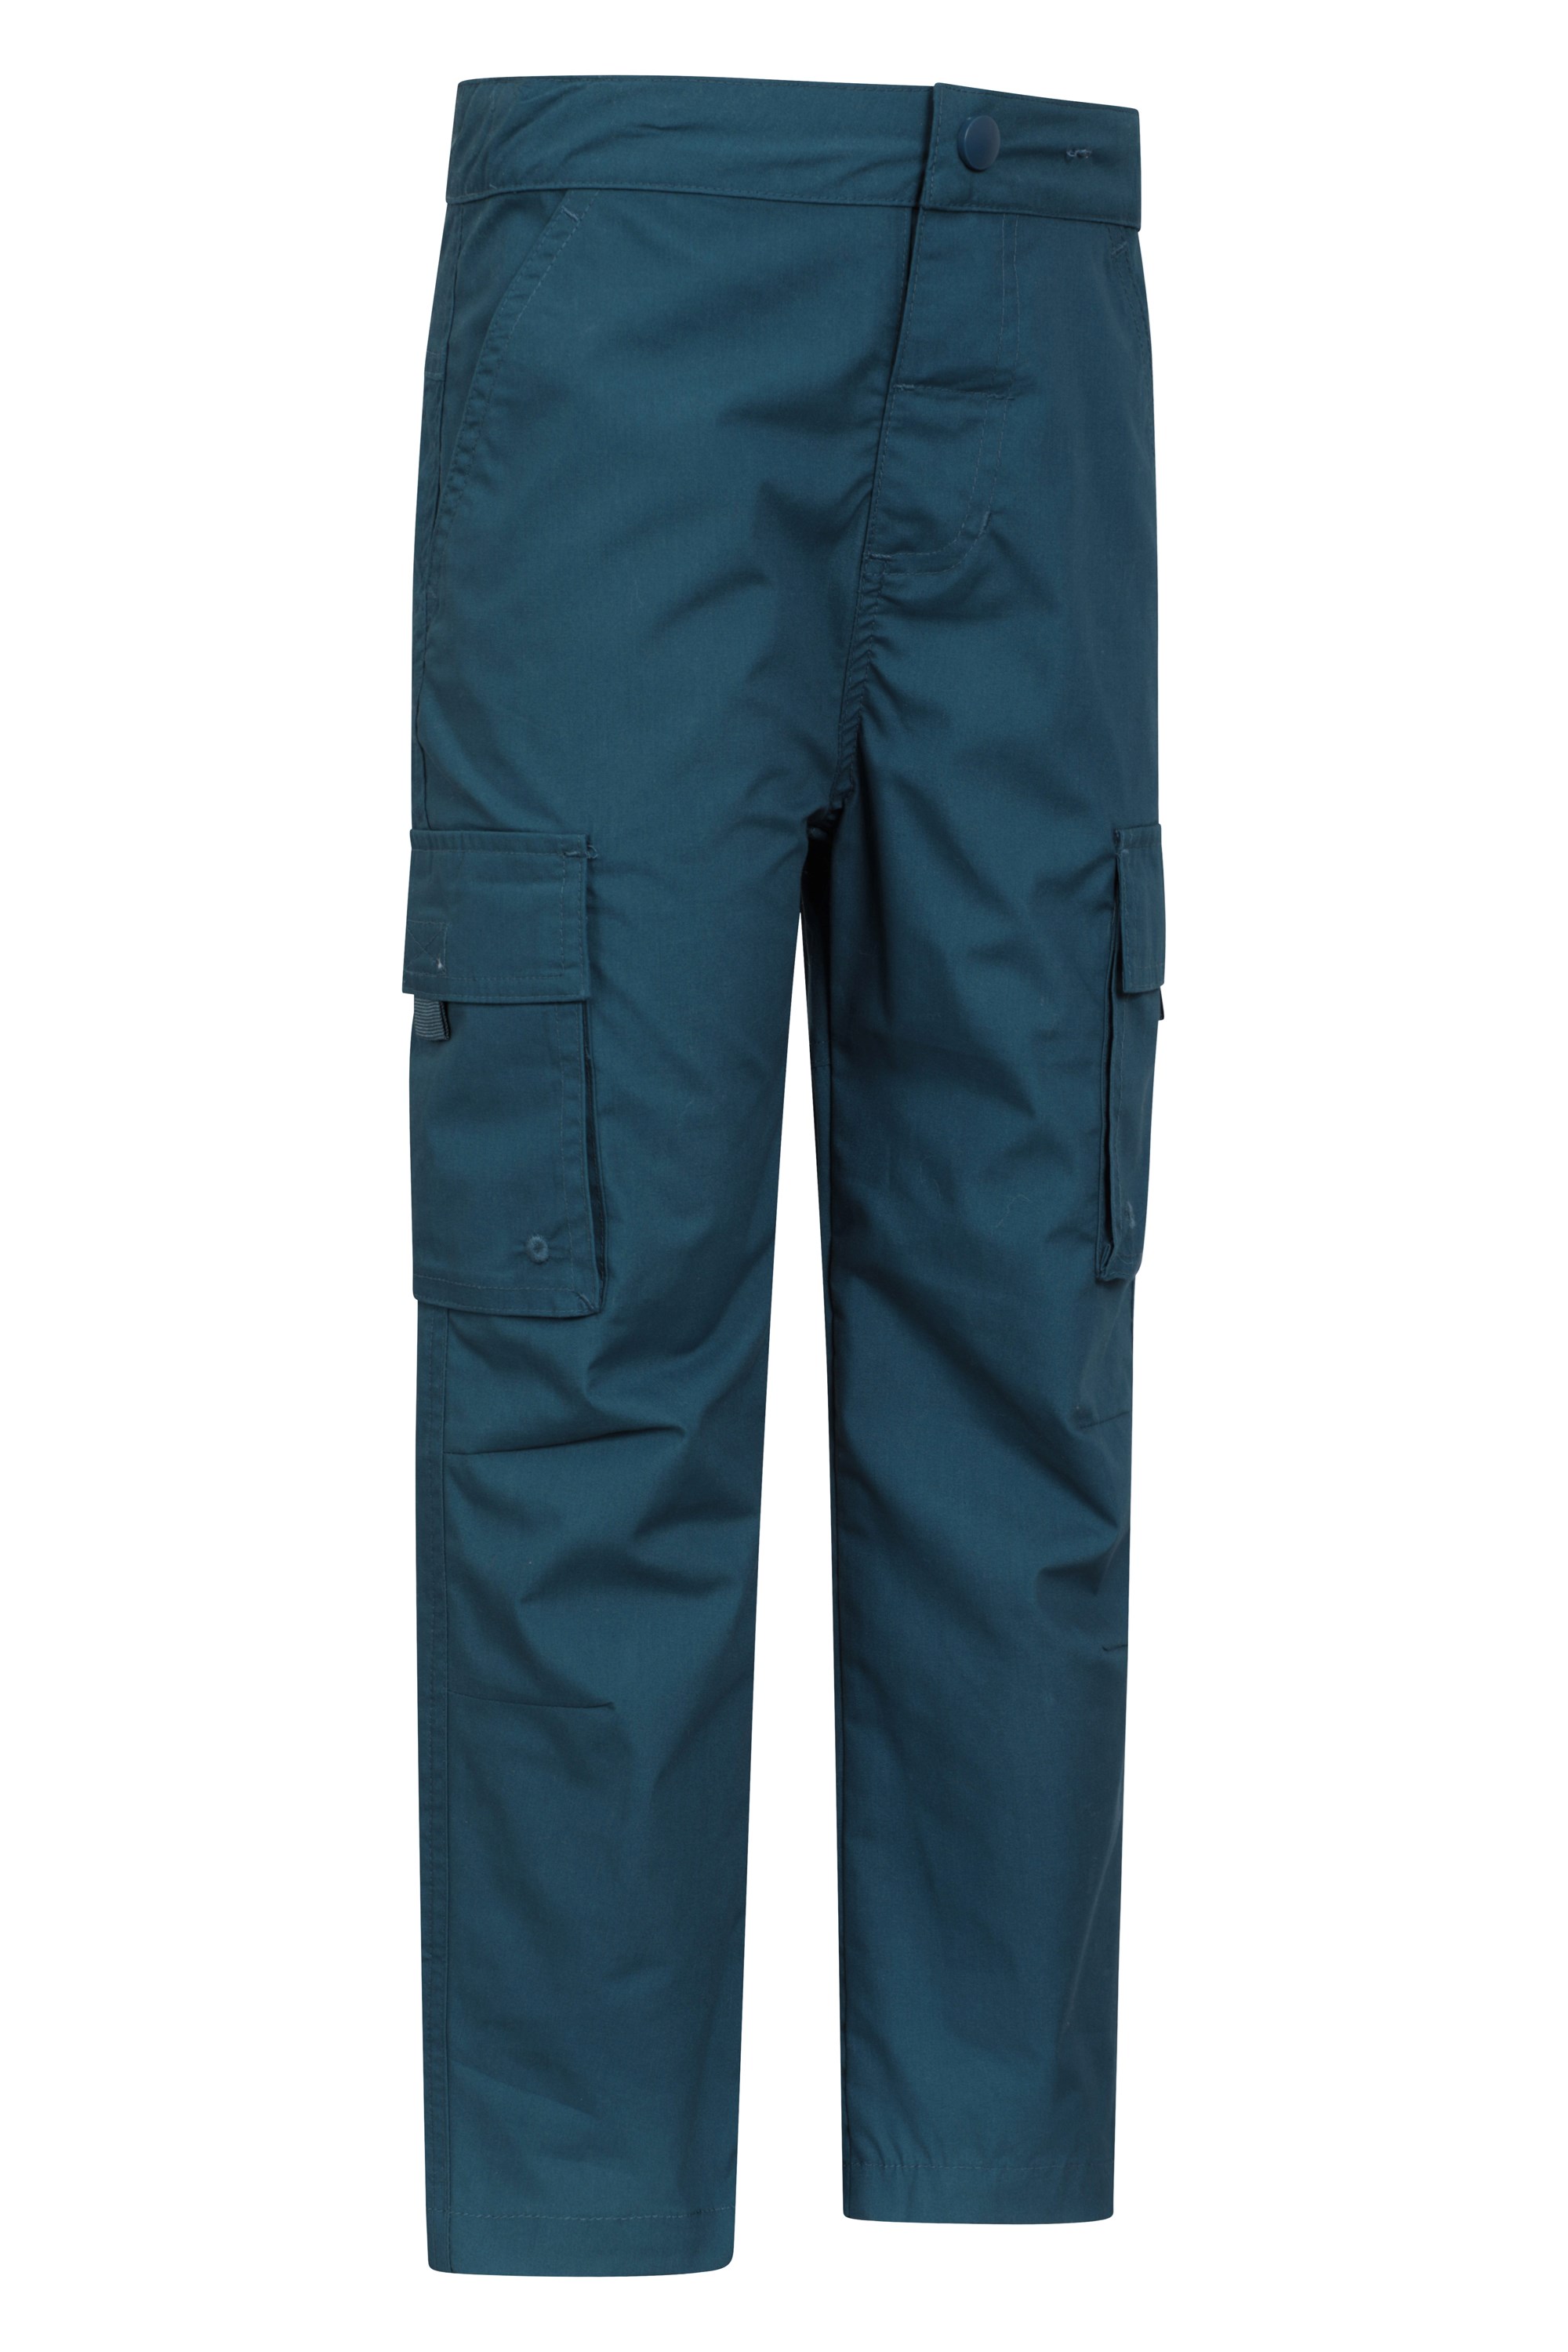 Round Two Avalanche Hiking Cargo Pants Blue Men's Size Medium NWT